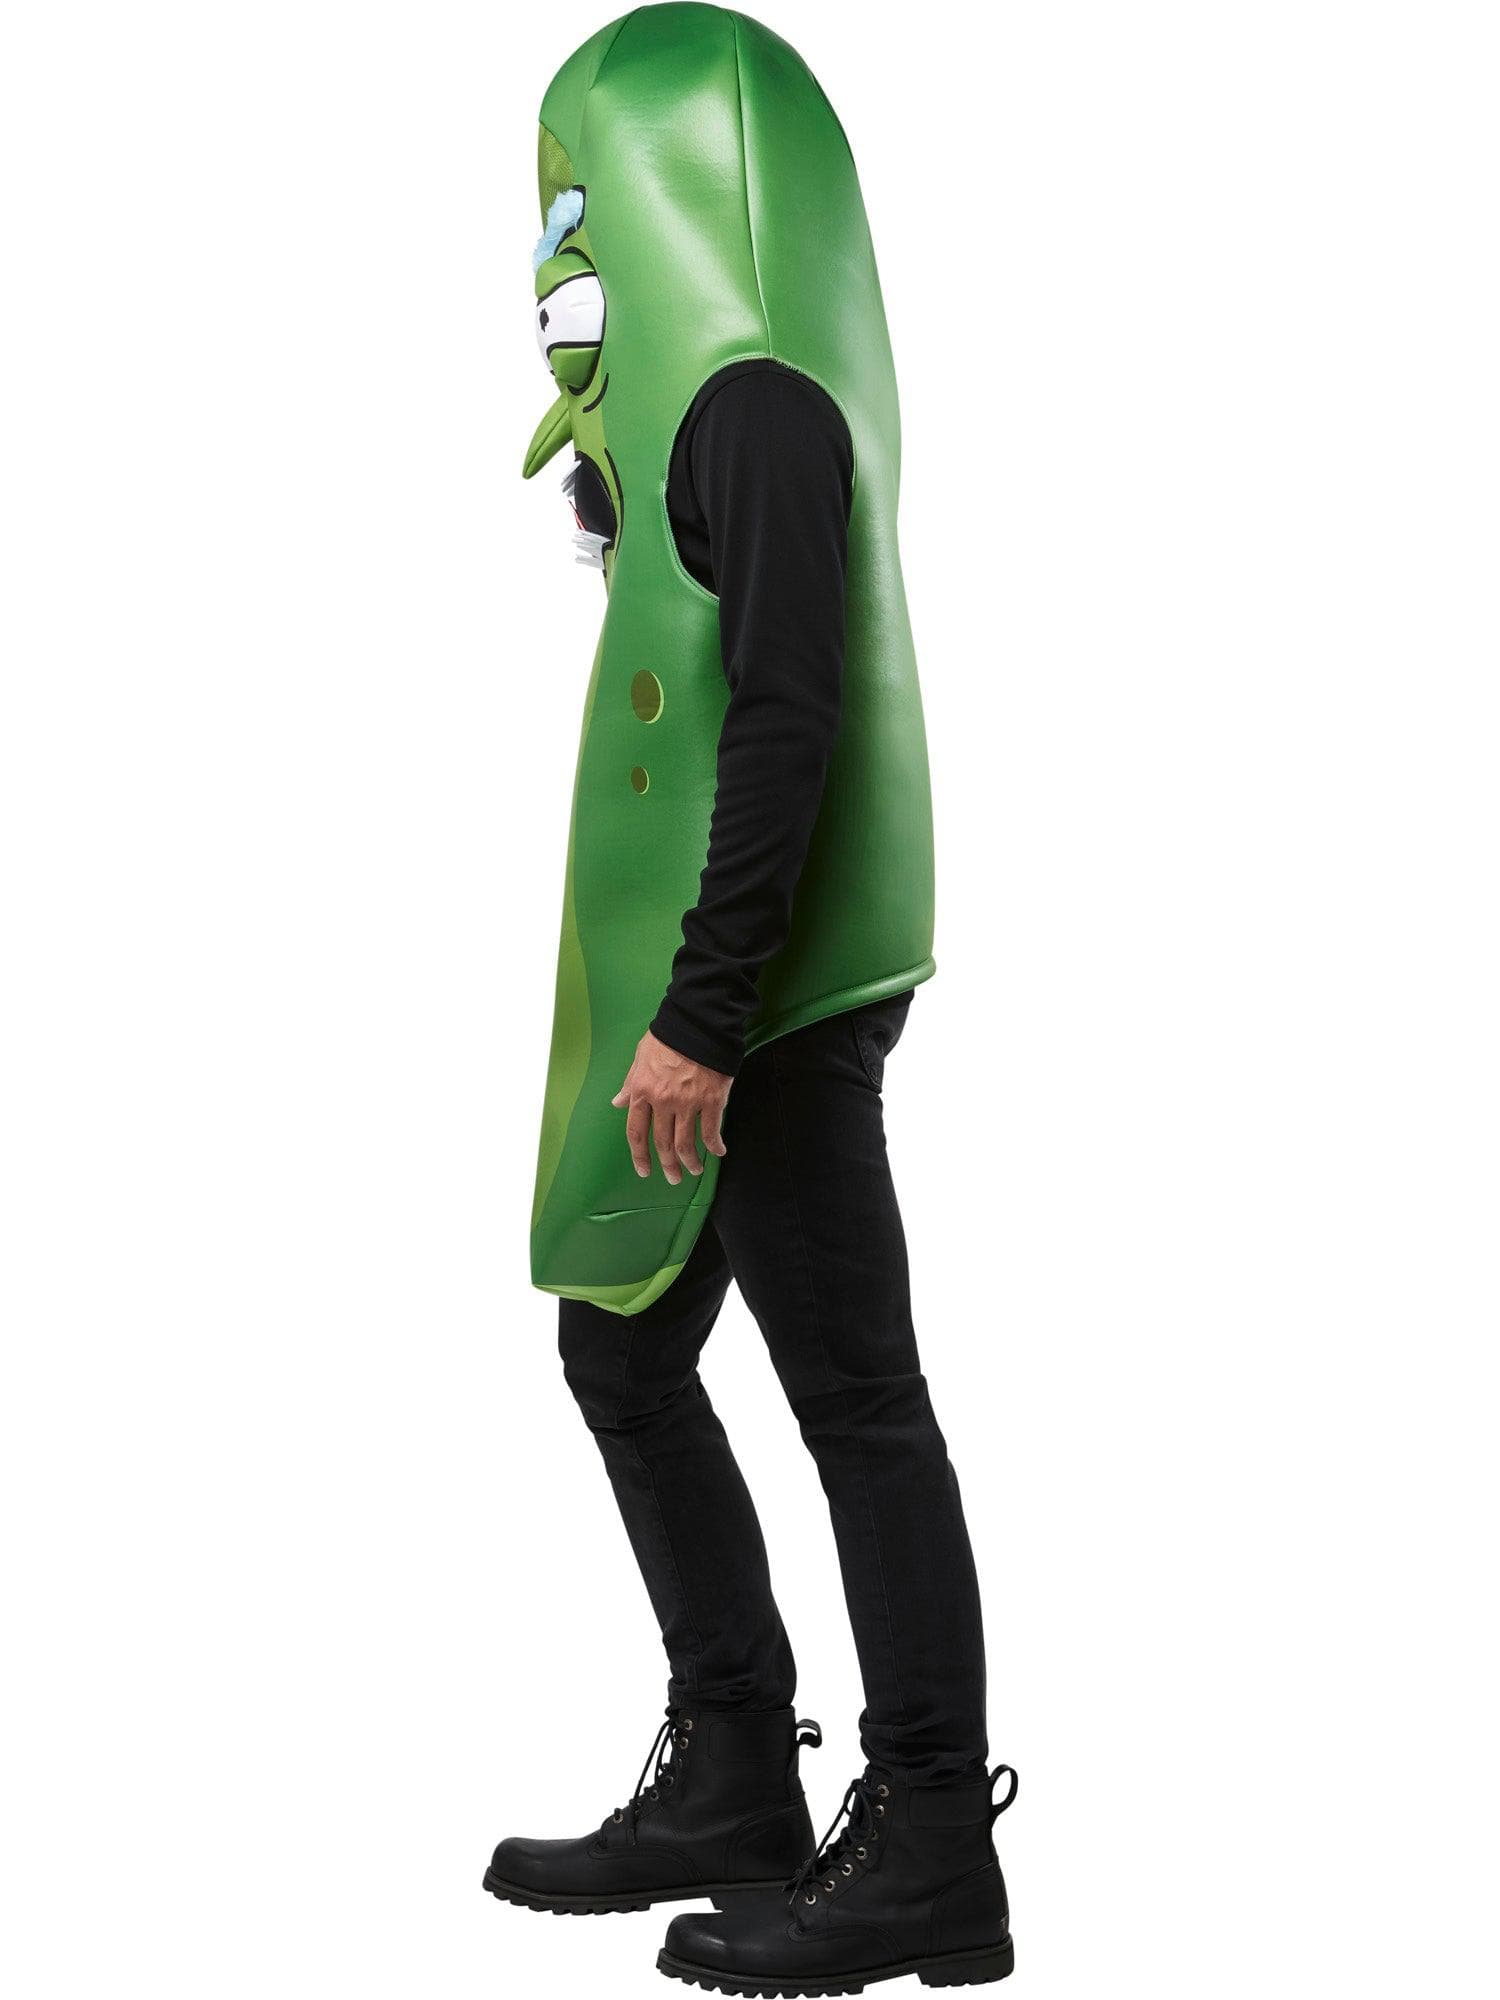 Rick and Morty Pickle Rick Adult Costume - costumes.com